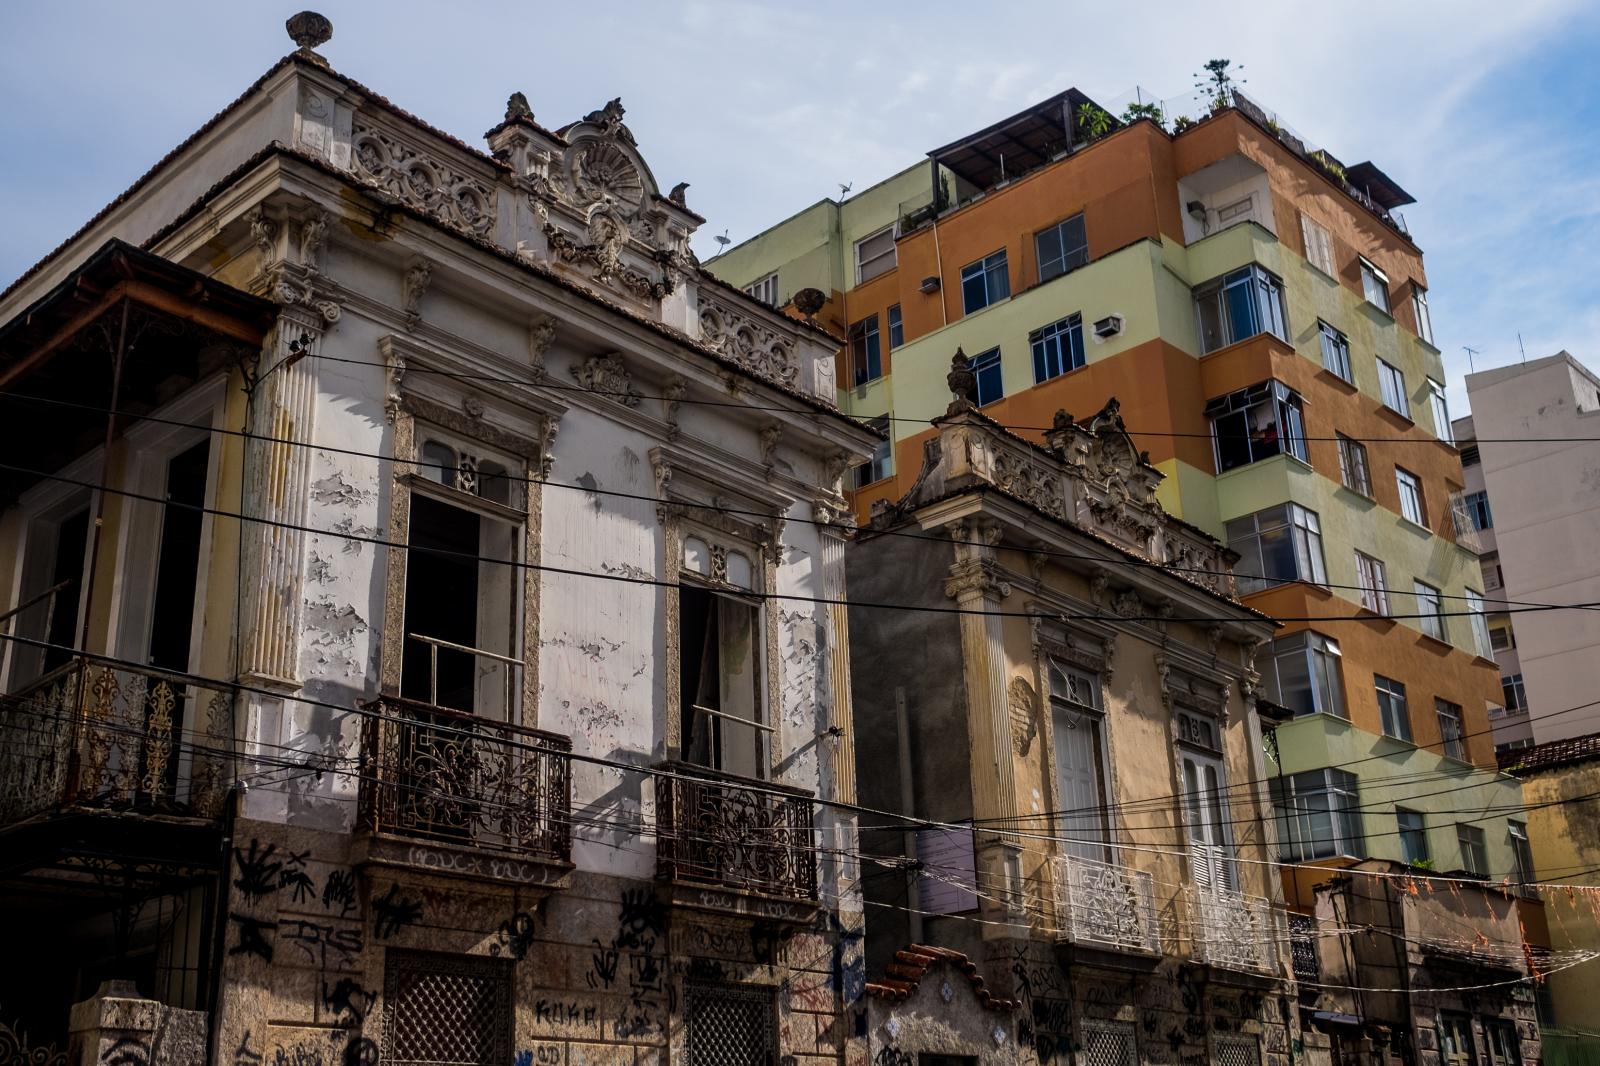 Rio's squatters: reclaiming rights to the city